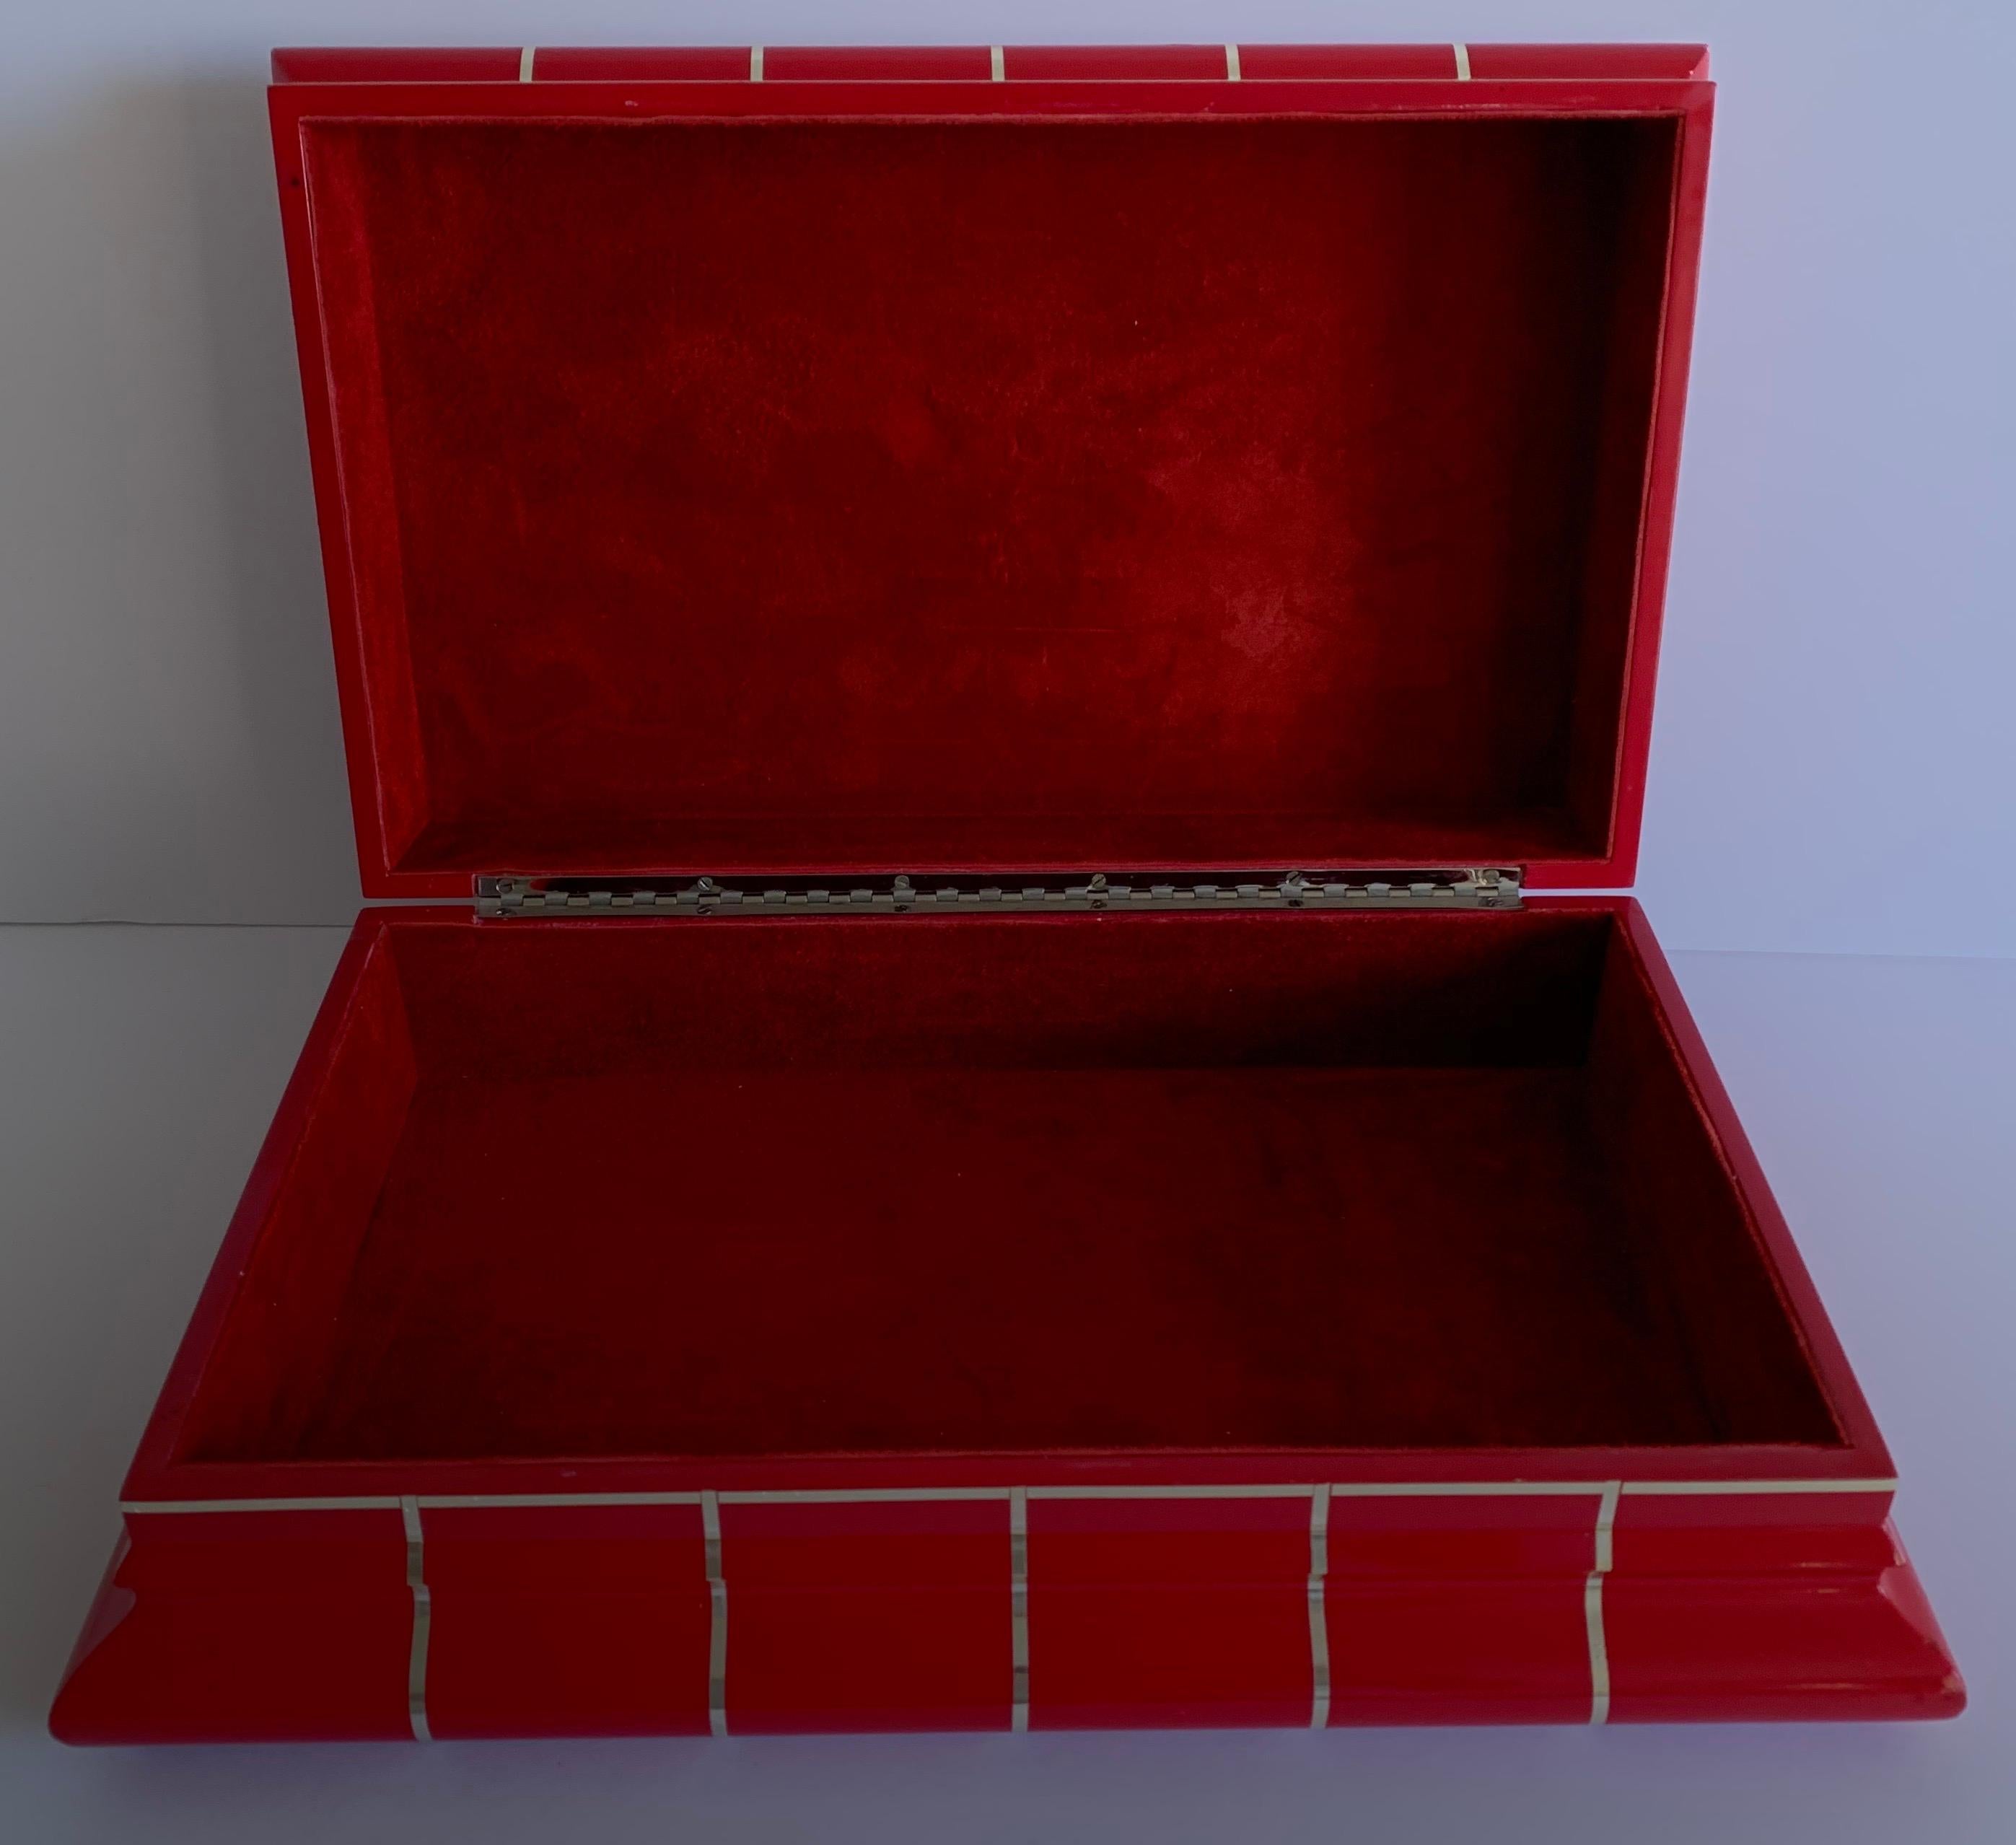 Large red lacquer box attributed to Karl Springer. Inset polished brass trim in a geometric design. Lined in red suede. Hinge style attached lid. No makers mark.